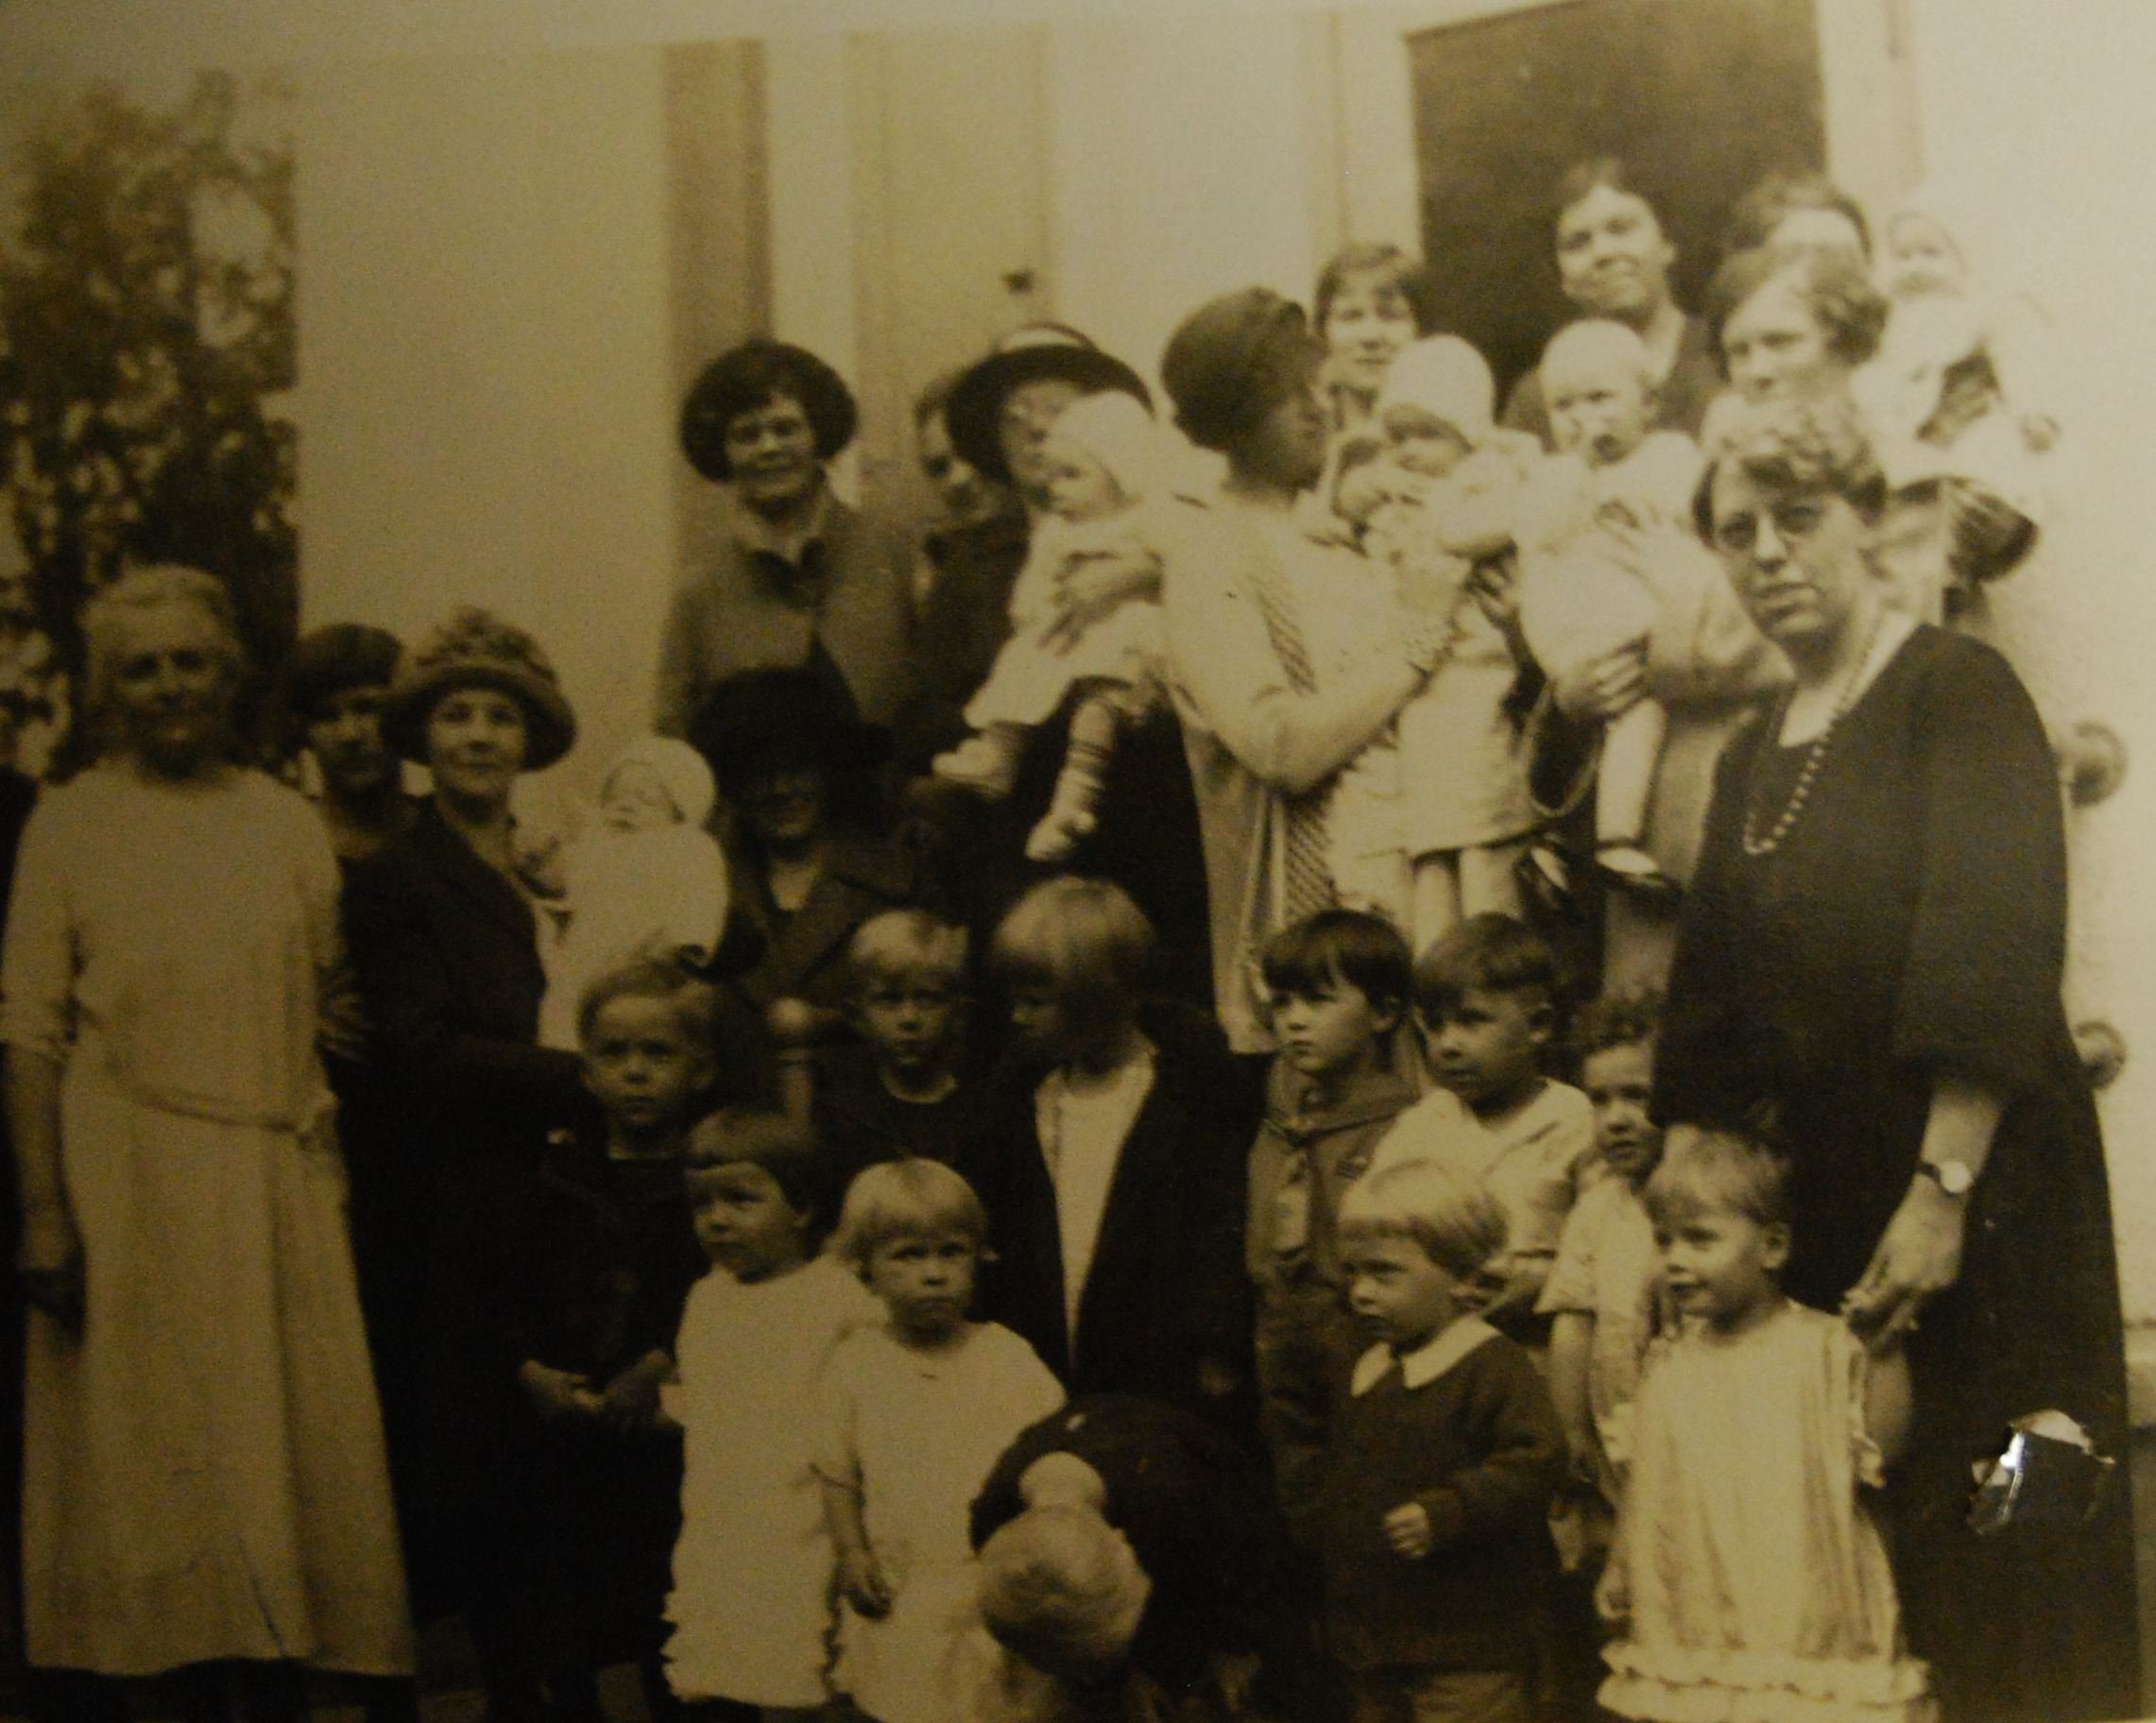 Mothers and children, 1920s